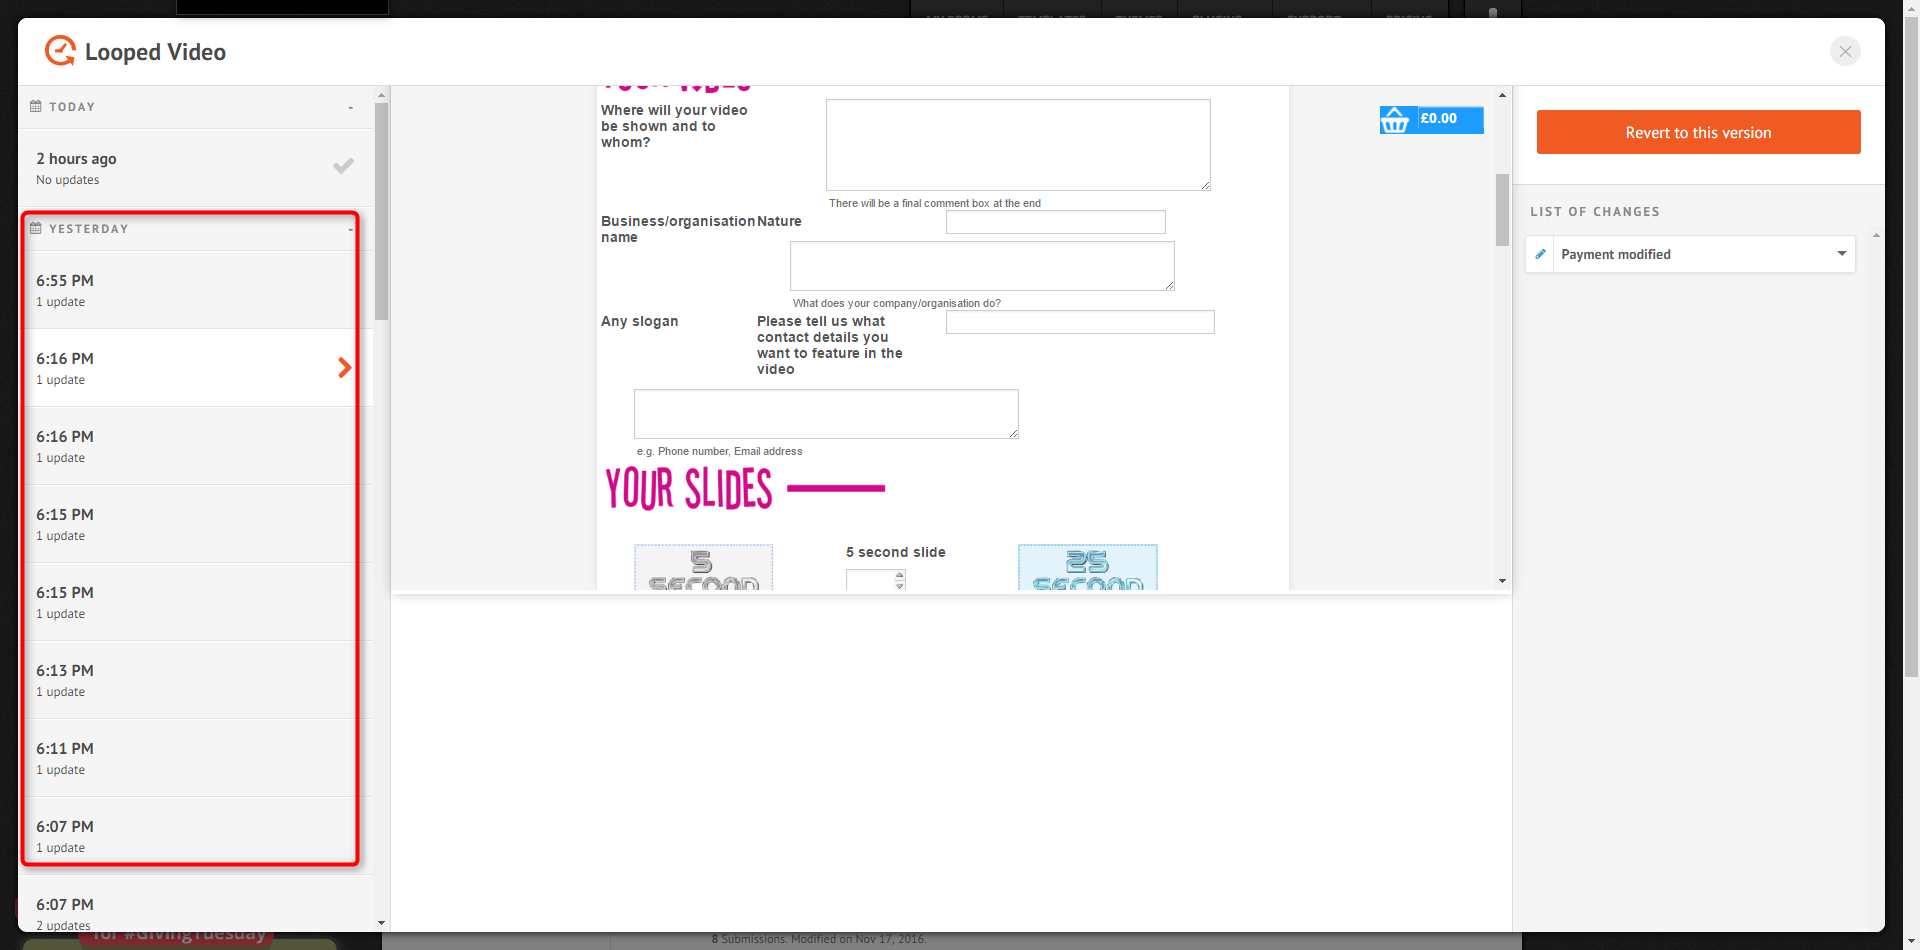 The spinners on my form are not working and the whole form has gone buggy Image 1 Screenshot 30